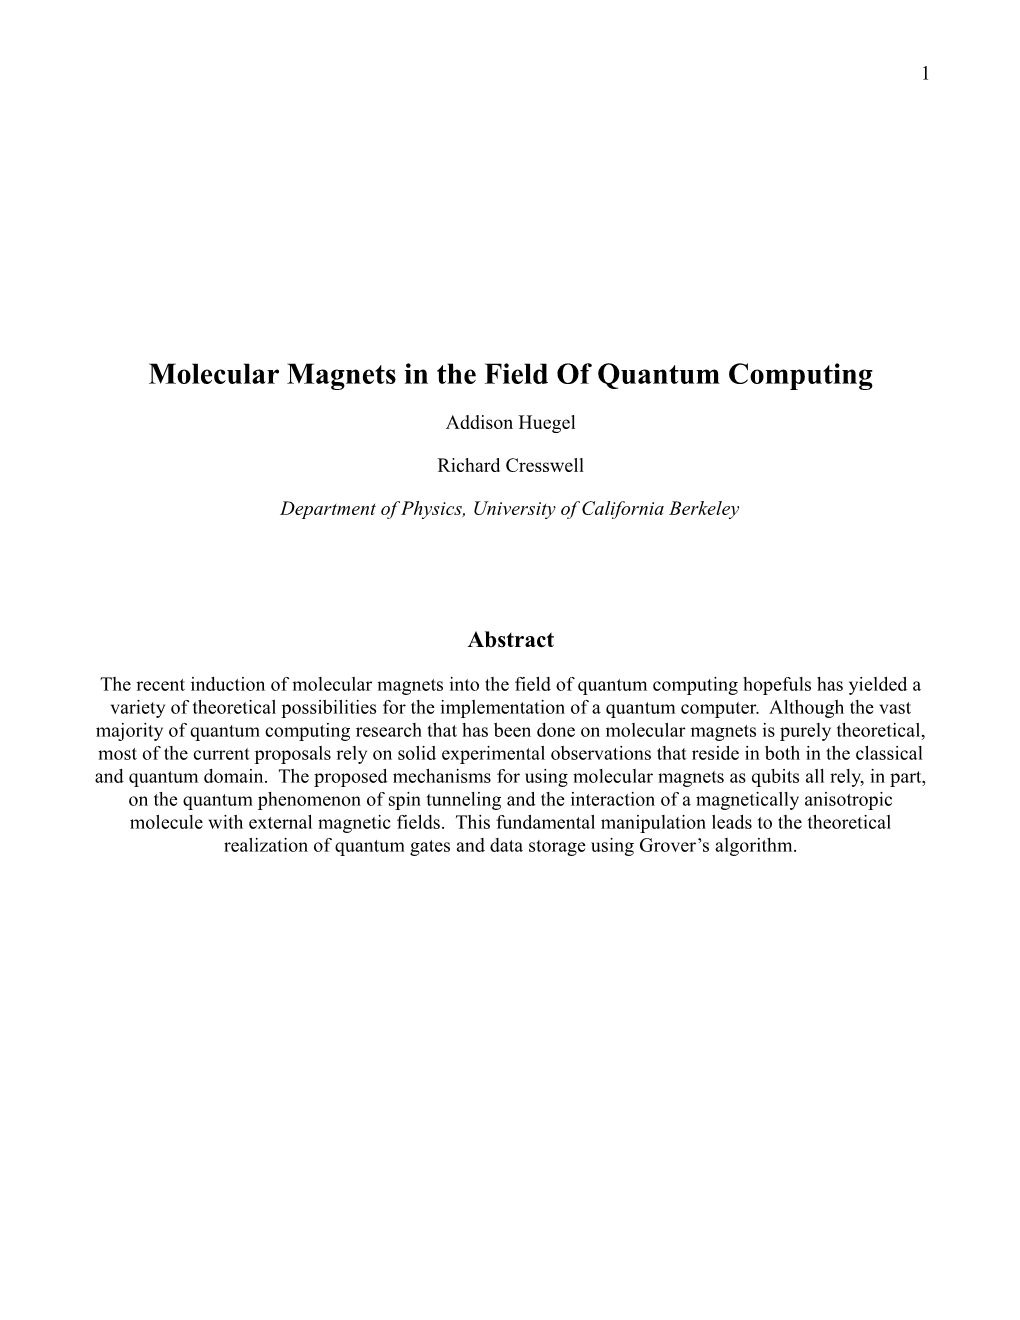 Molecular Magnets in the Field of Quantum Computing